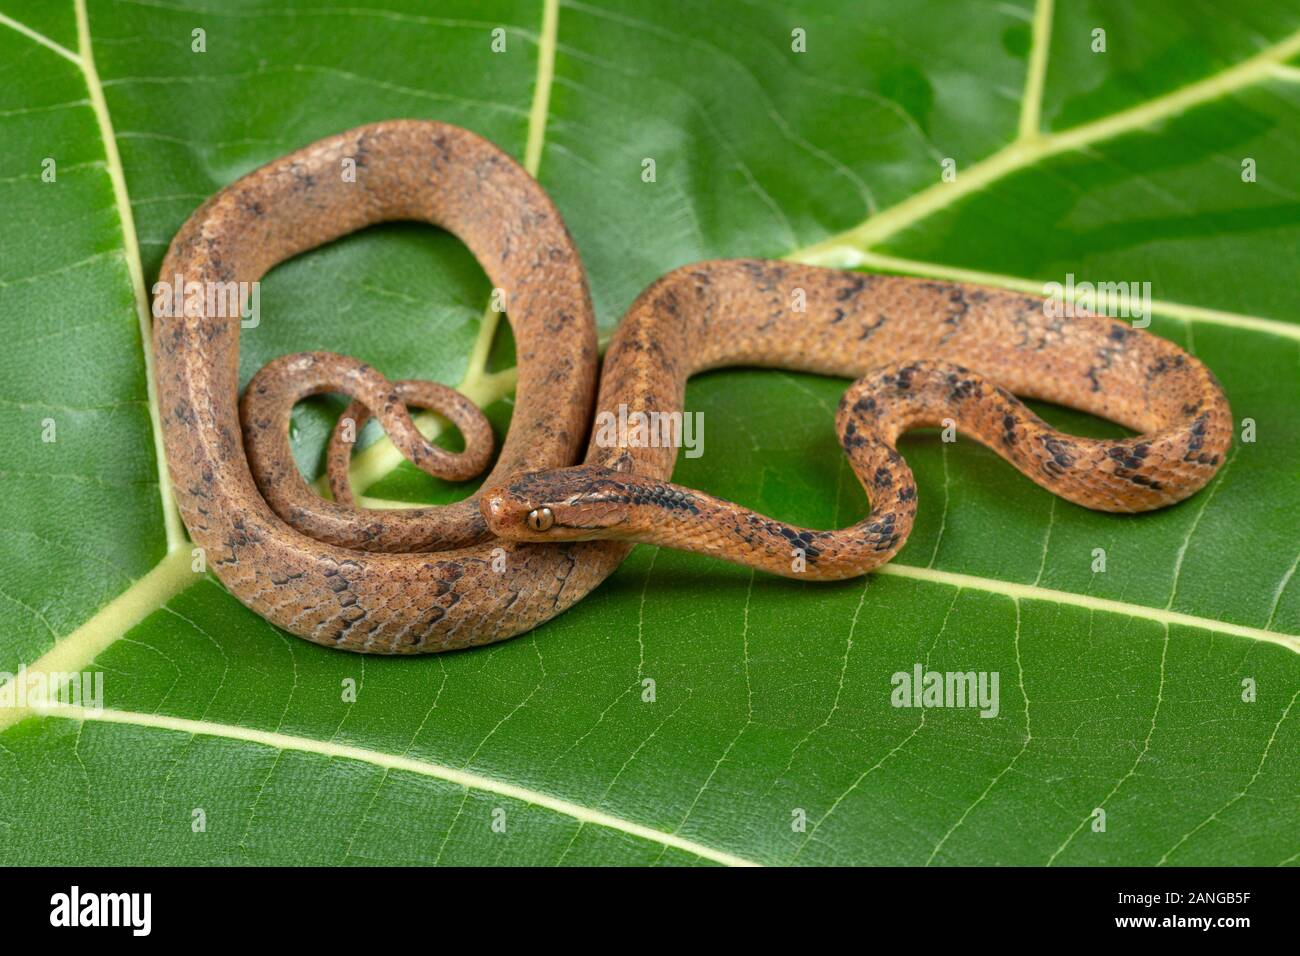 The common slug snake, Pareas monaticola is a species of snake found in Northeast India Stock Photo